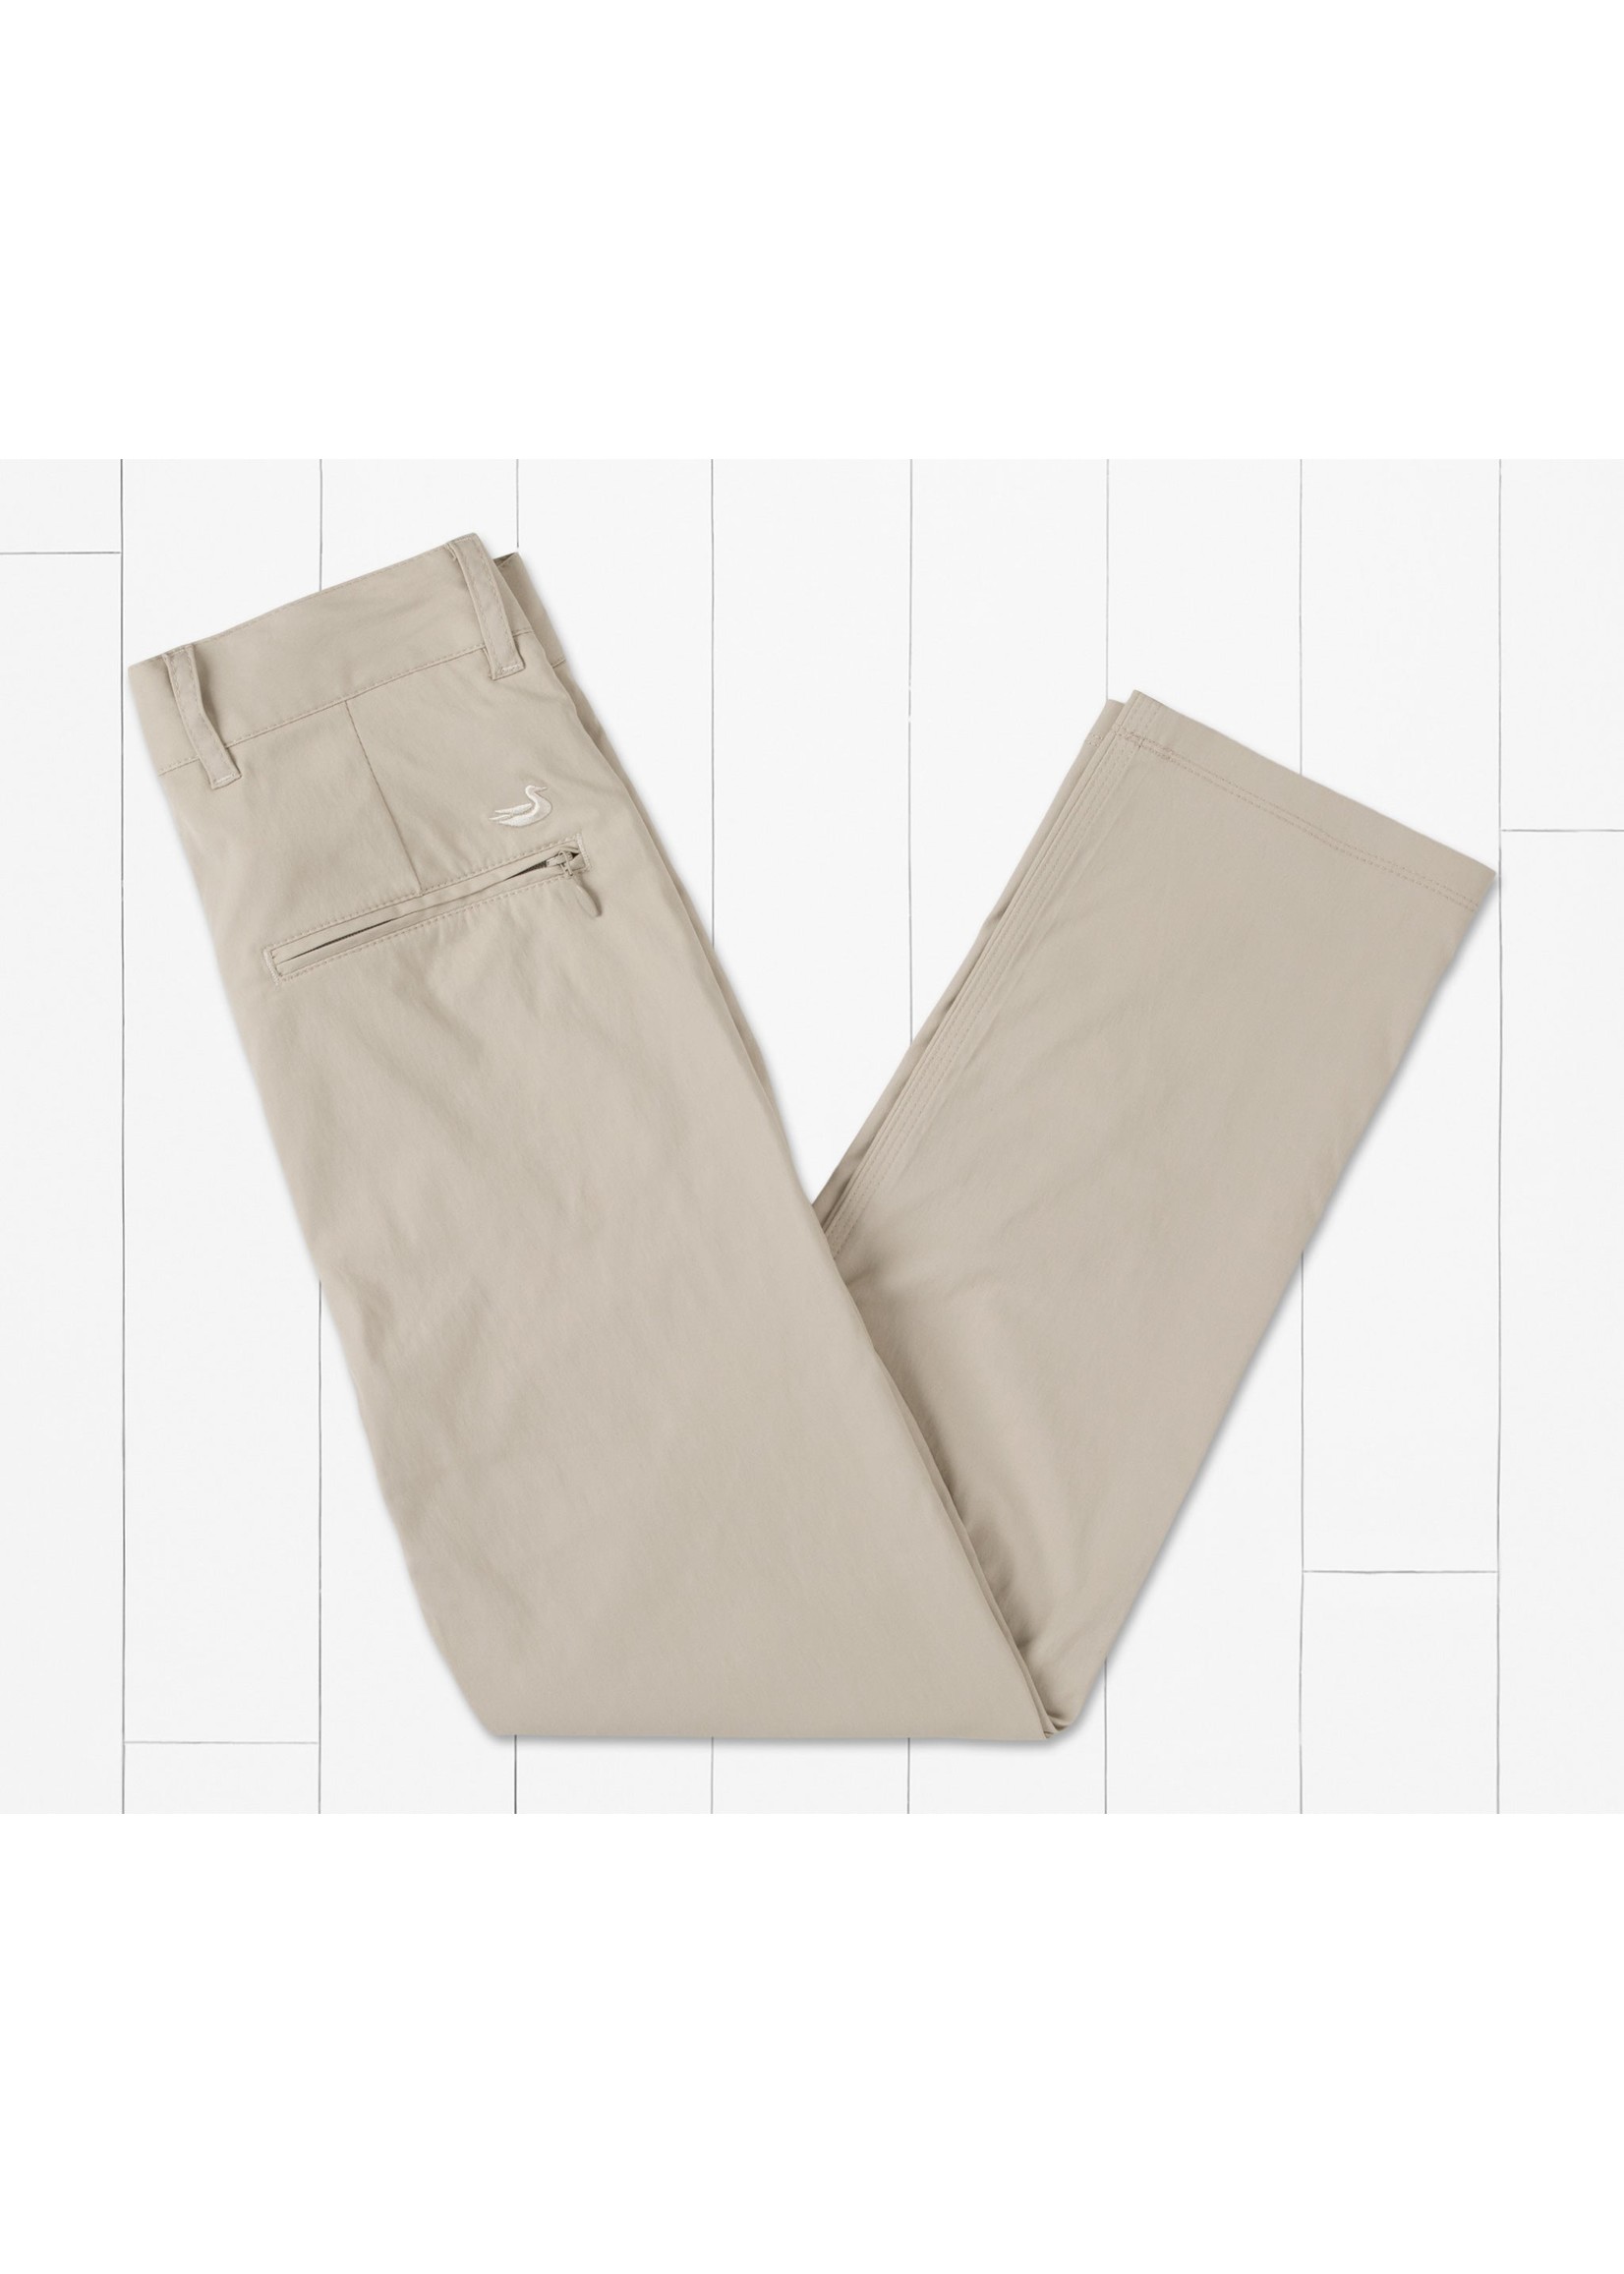 Southern Marsh Youth Marlin Stretch Performance Pants